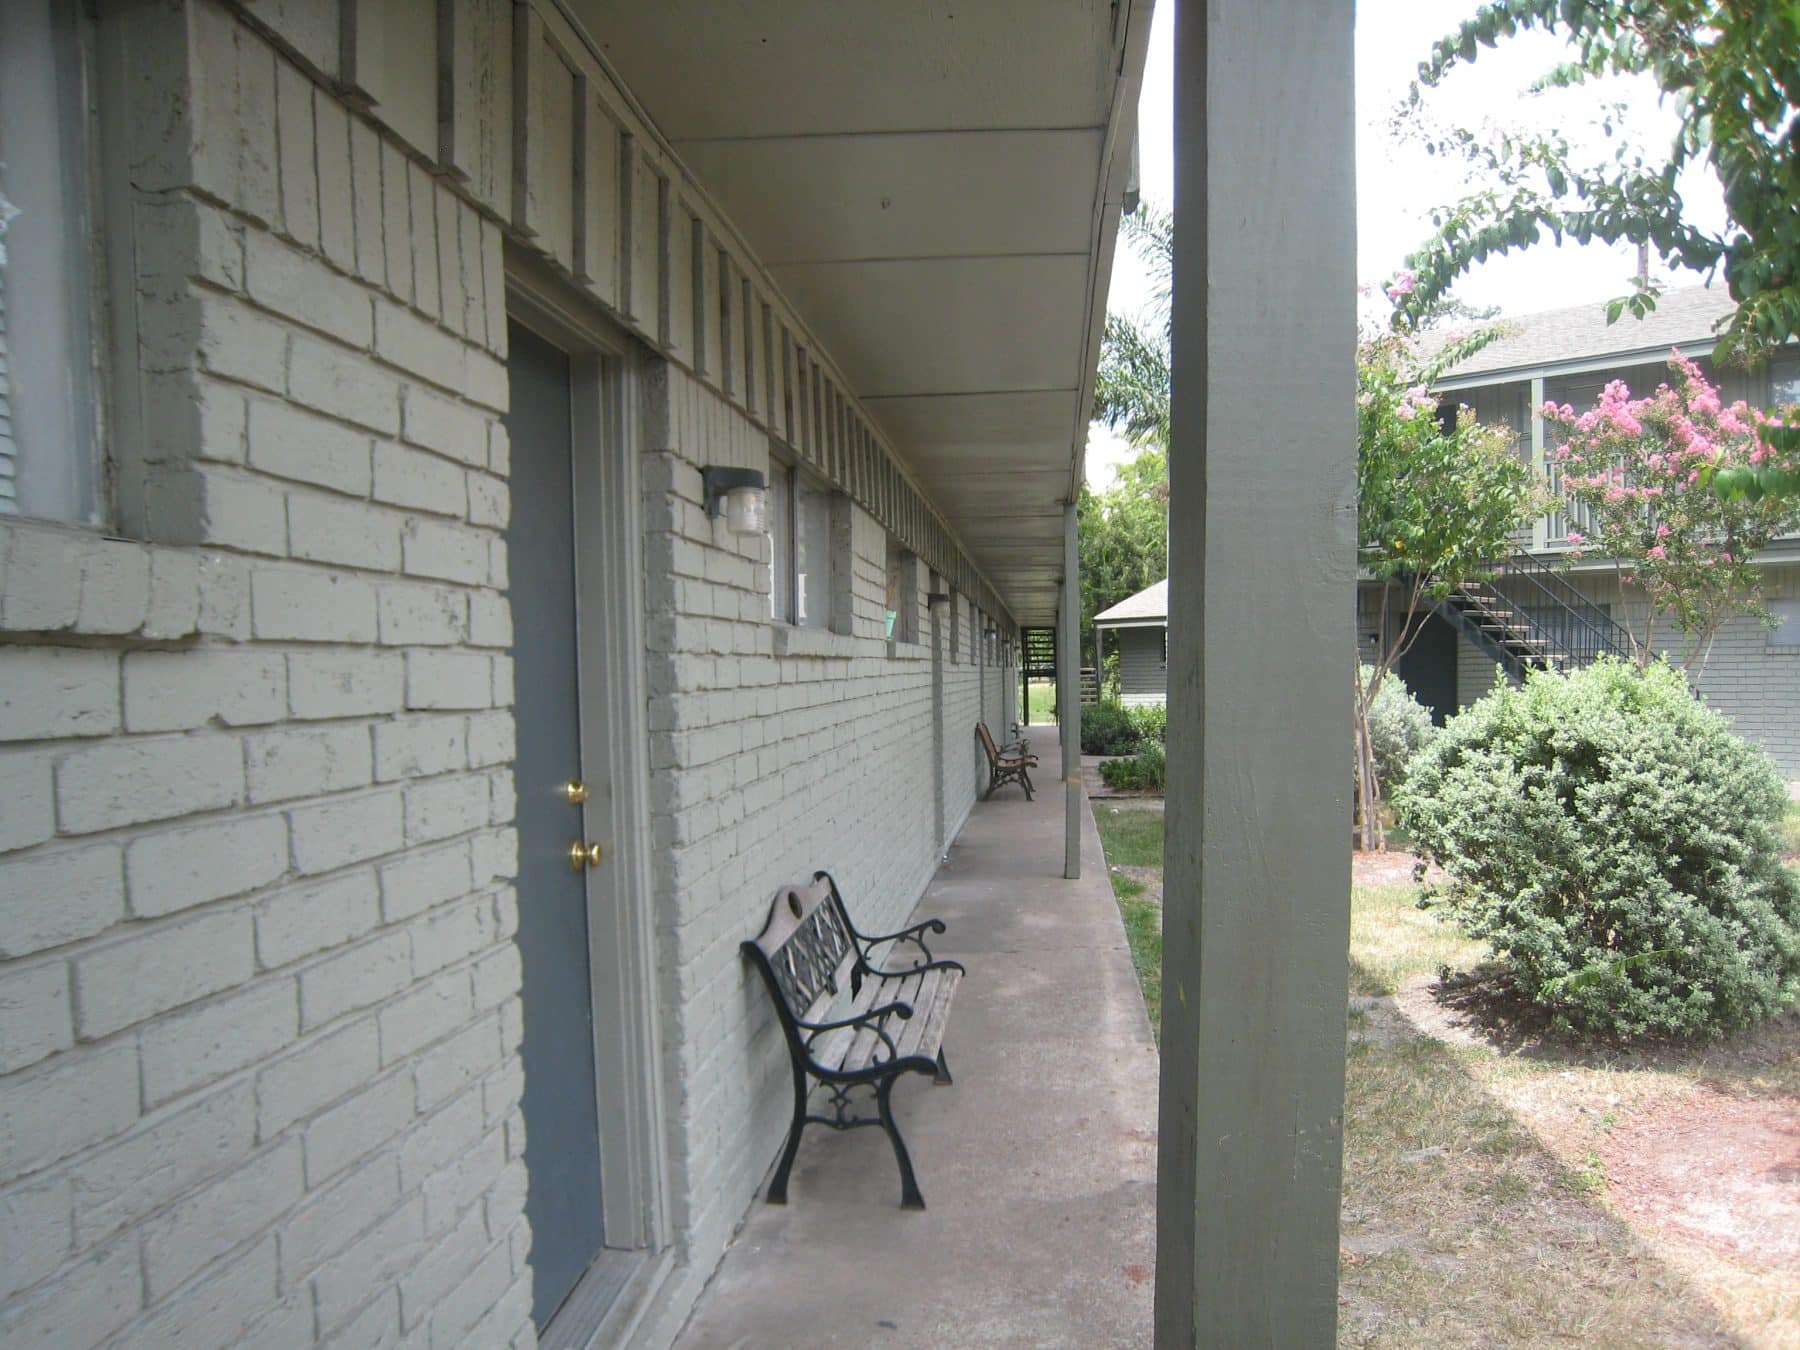 View from one end of the front of a long motel-like apartment building. The brick front is painted a sage green, and a roof overhangs the concrete walkway. Slatted wooden benches are placed between the front doors, which are a darker green than the building. In front of the building are shrubs including crape myrtle, and on the other side of the small yard can be seen part of a similar-looking building.